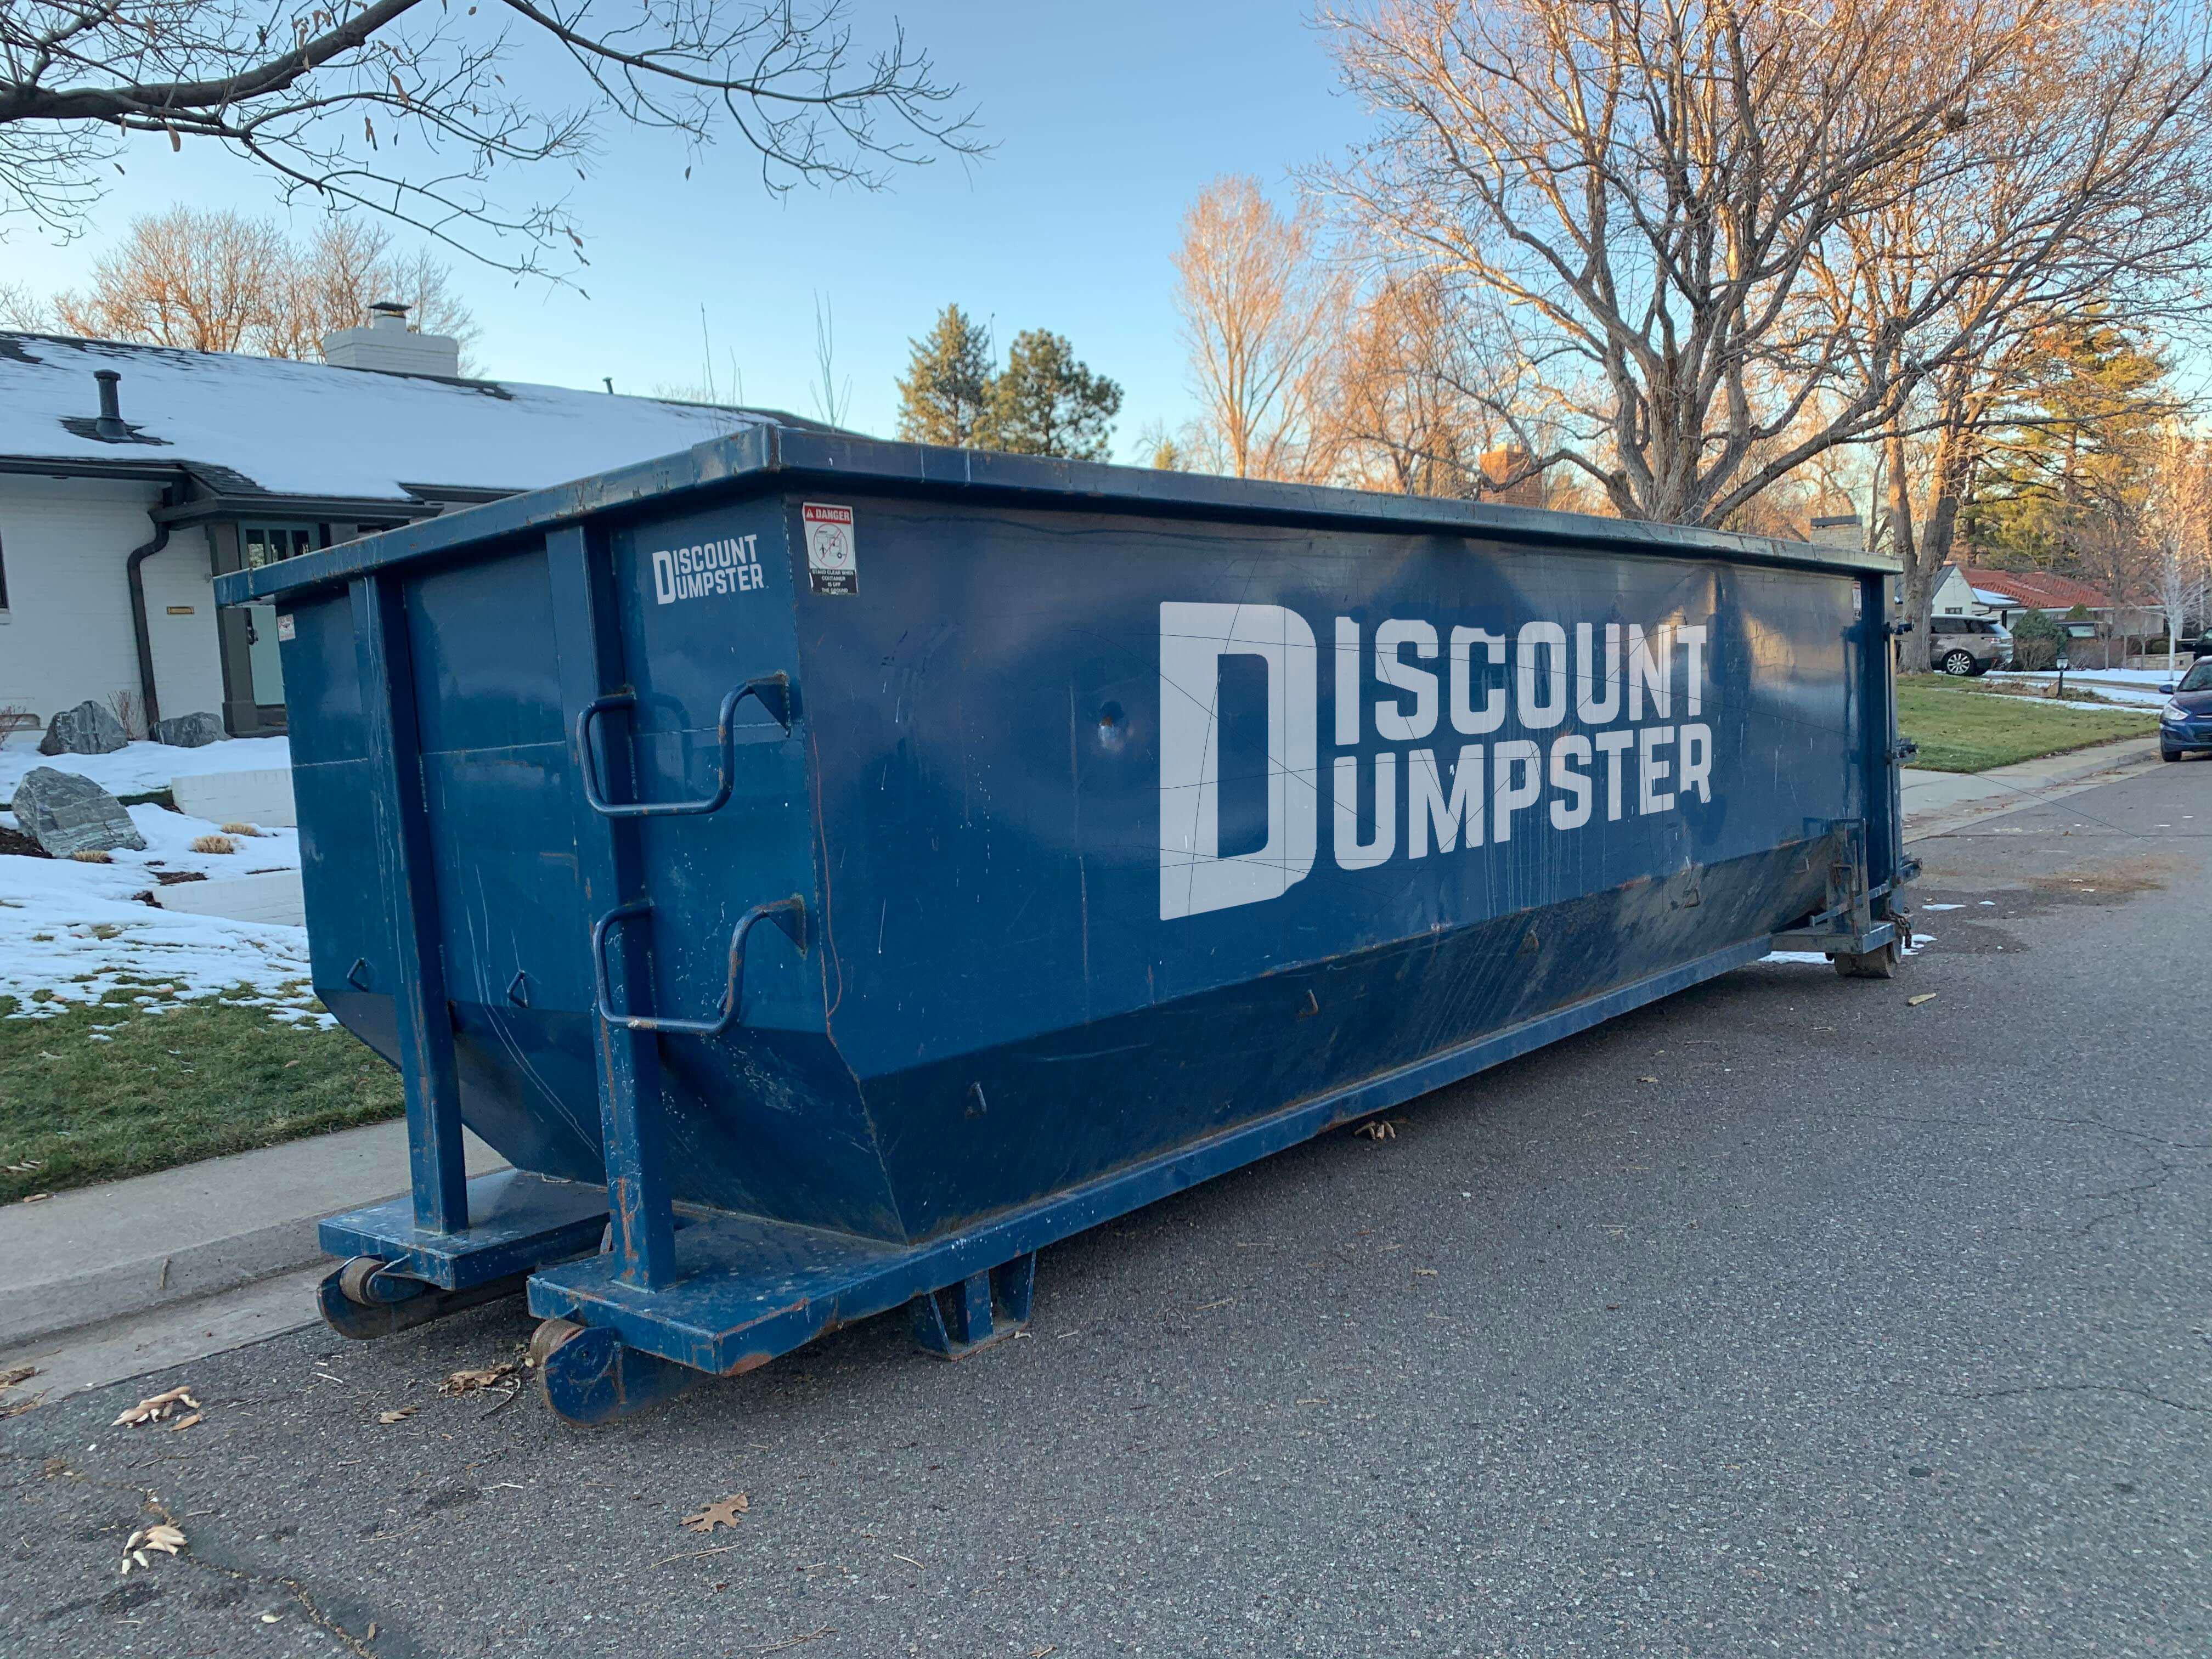 Discount dumpster roll off dumpsters can go anywhere in chicago il Discount Dumpster Chicago (312)549-9198